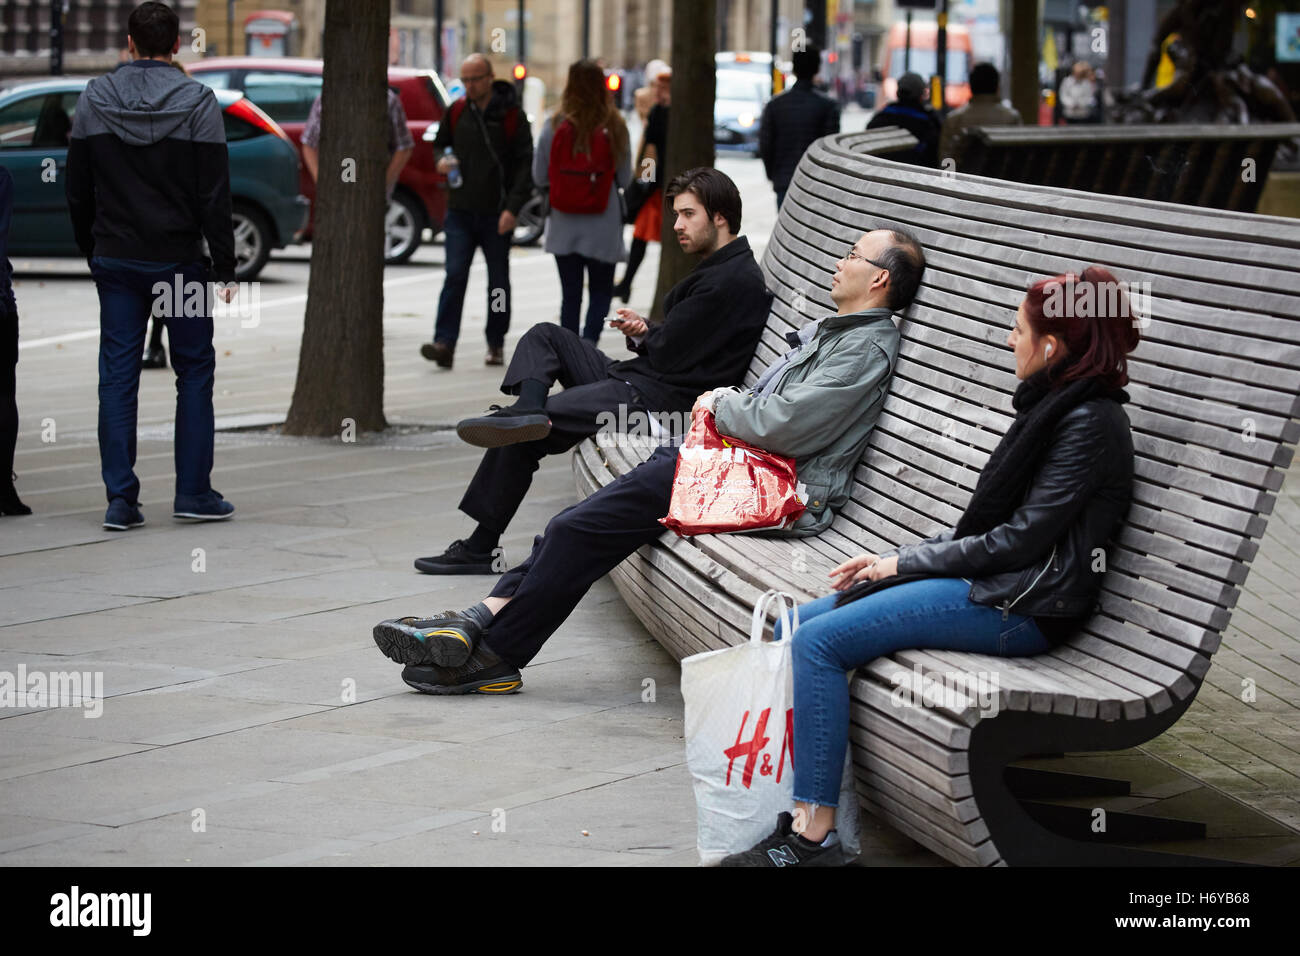 Manchester public seating benches modern   Design pretty wood curved resting stopped break relaxed relaxing sat stopped using pu Stock Photo